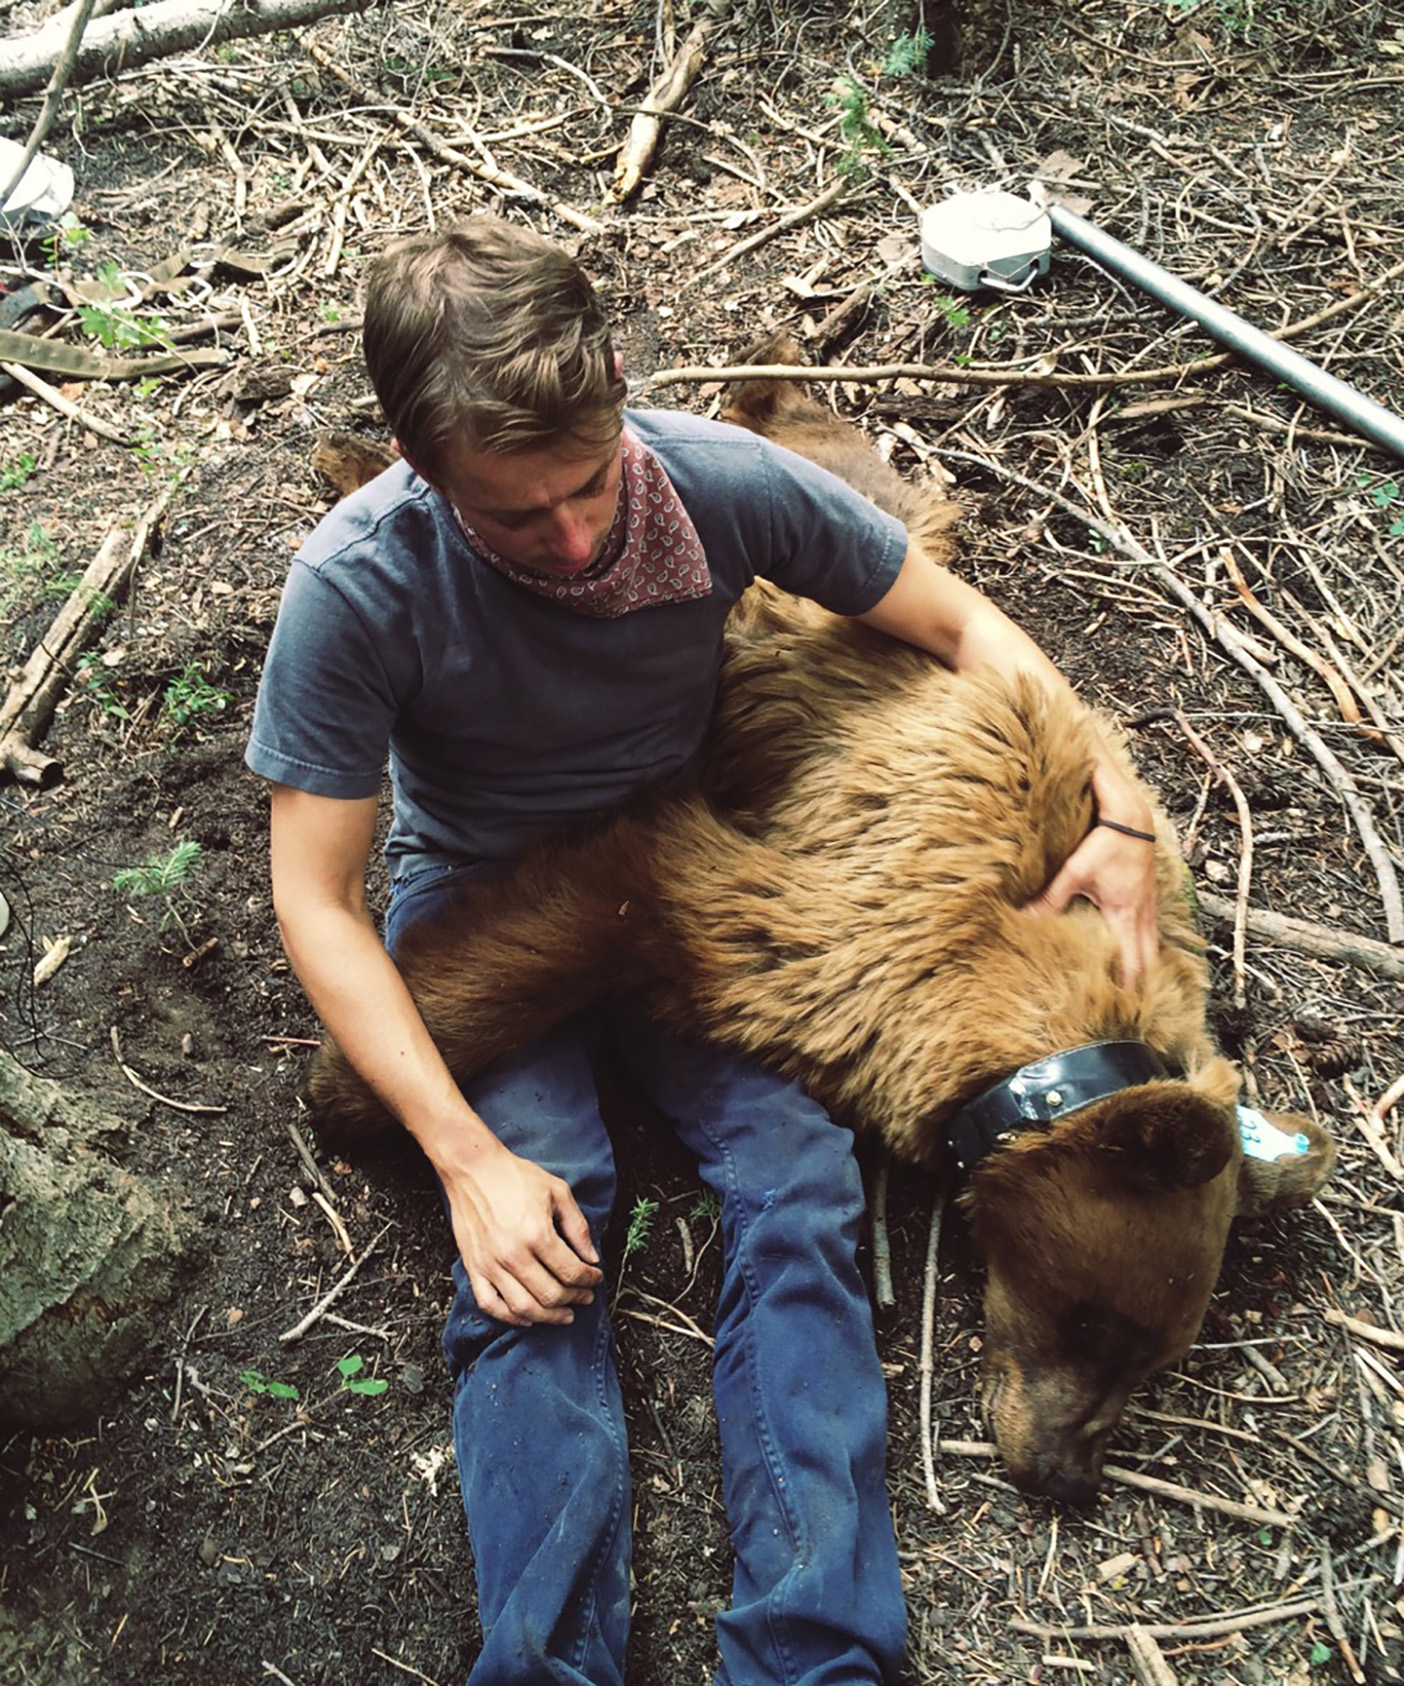 BYU student with a sedated grizzly bear.